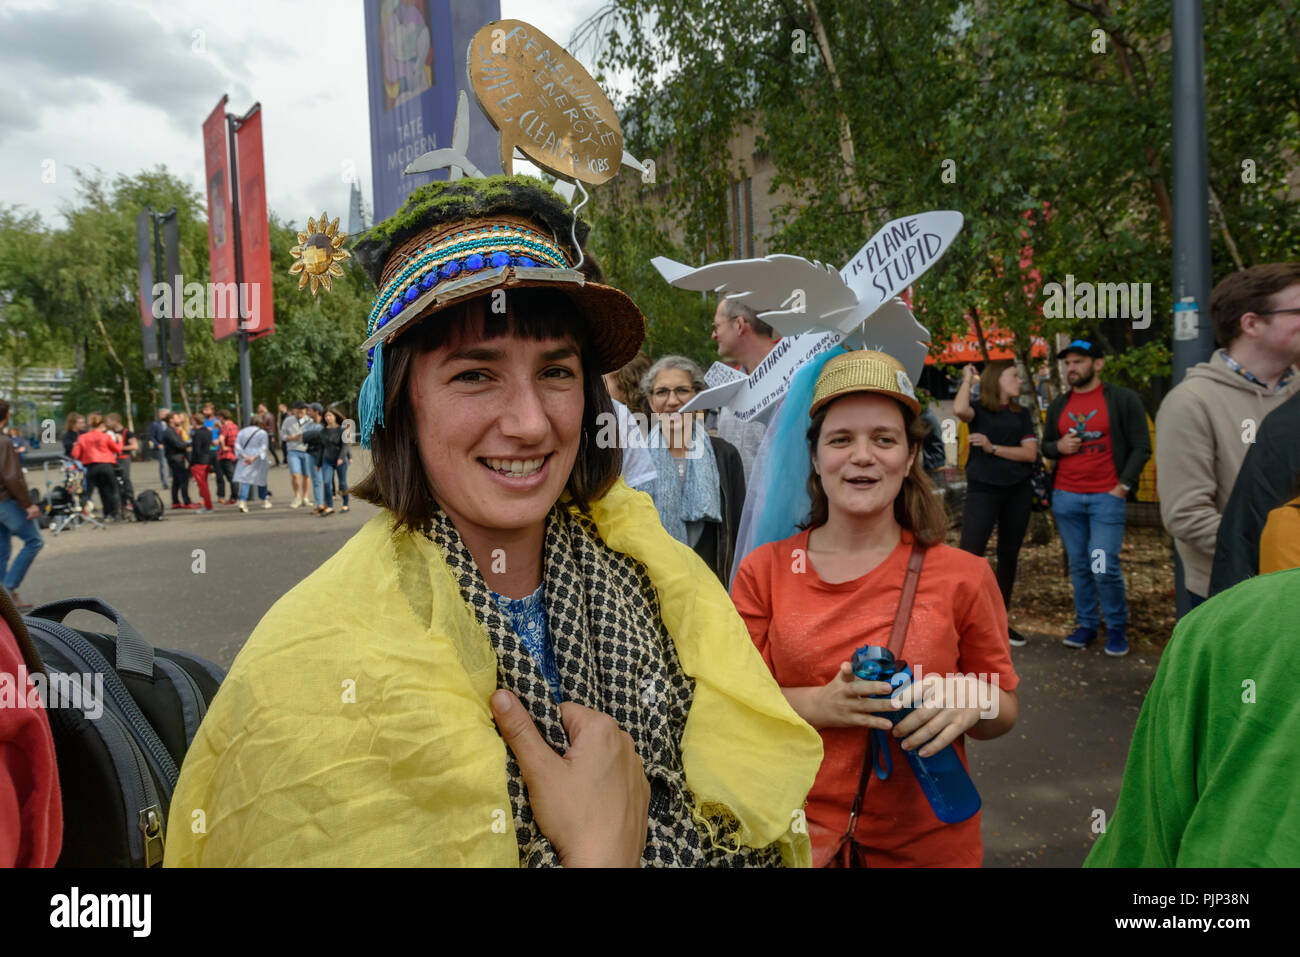 London, UK. 8th September 2018. Climate Reality supporters wear decorated hats at the rally in front of Tate Modern, one of thousands around the world demanding urgent action by government leaders to leaders commit to a fossil free world that works for all of us.  community leaders, organisers, scientists, storytellers an Credit: Peter Marshall/Alamy Live News Stock Photo